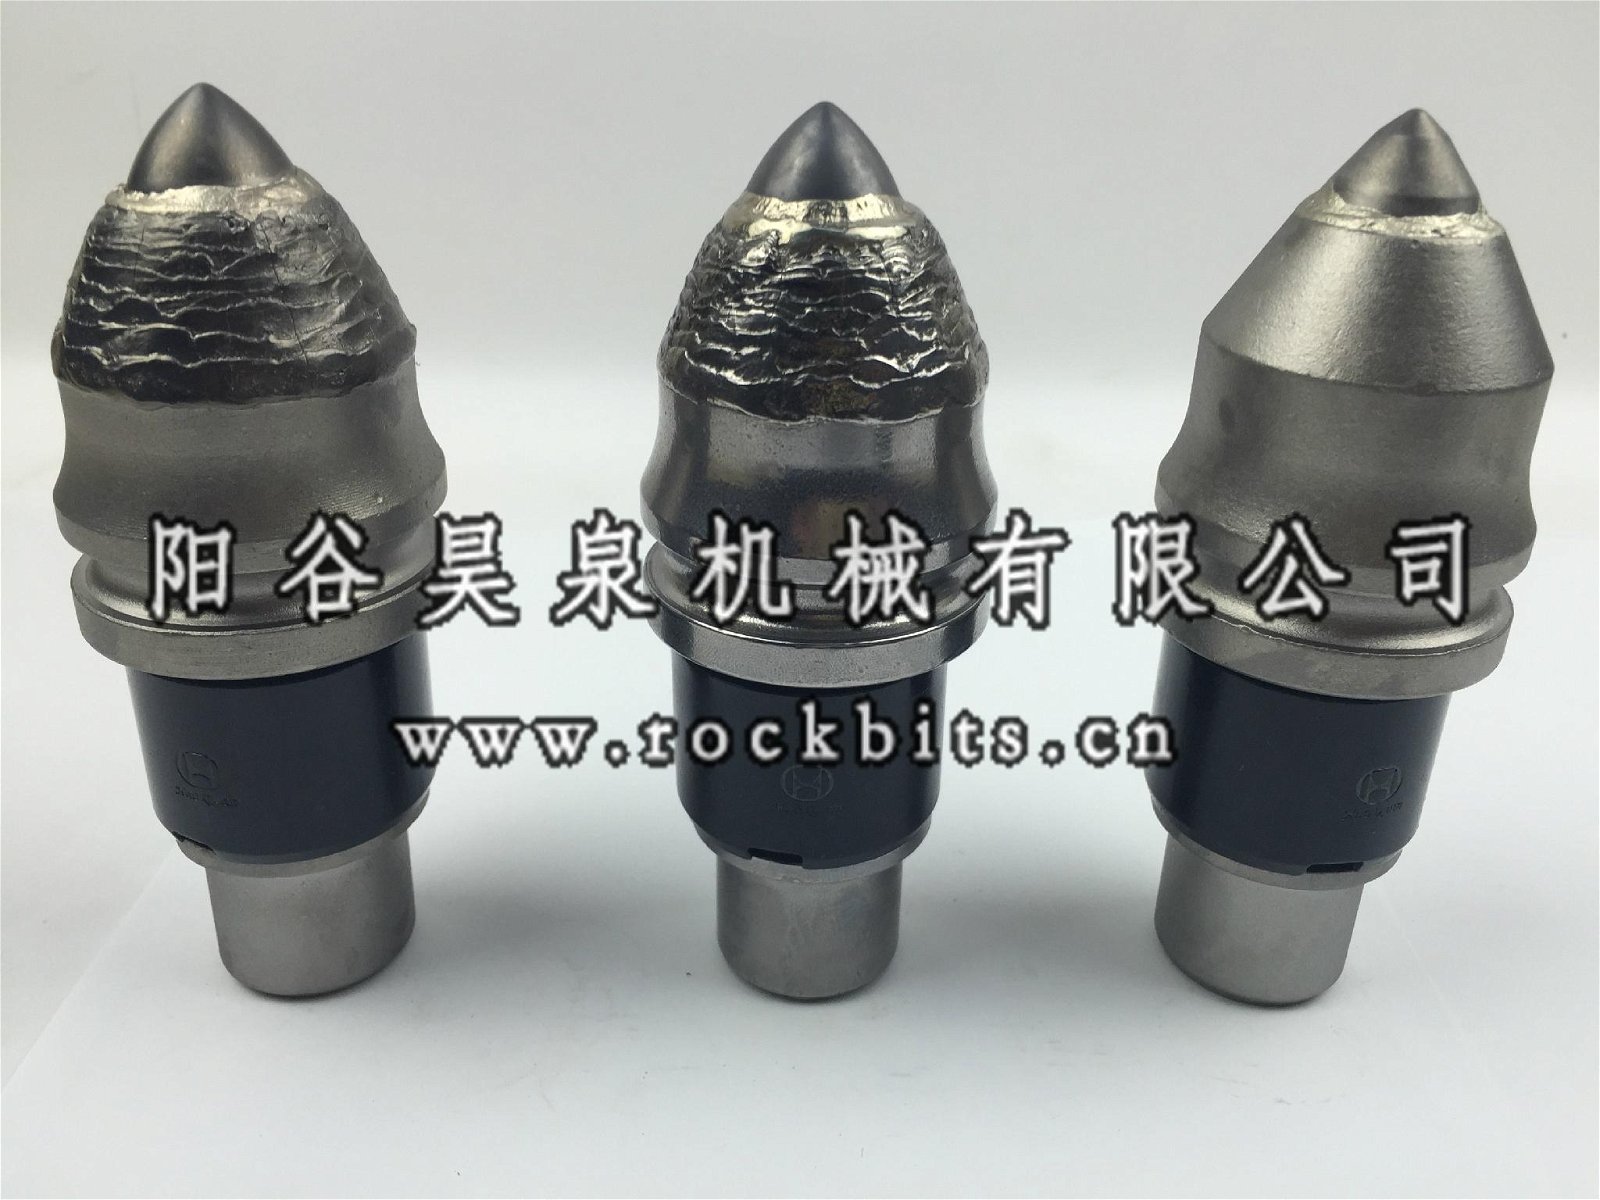 conical tools for foundation driiling